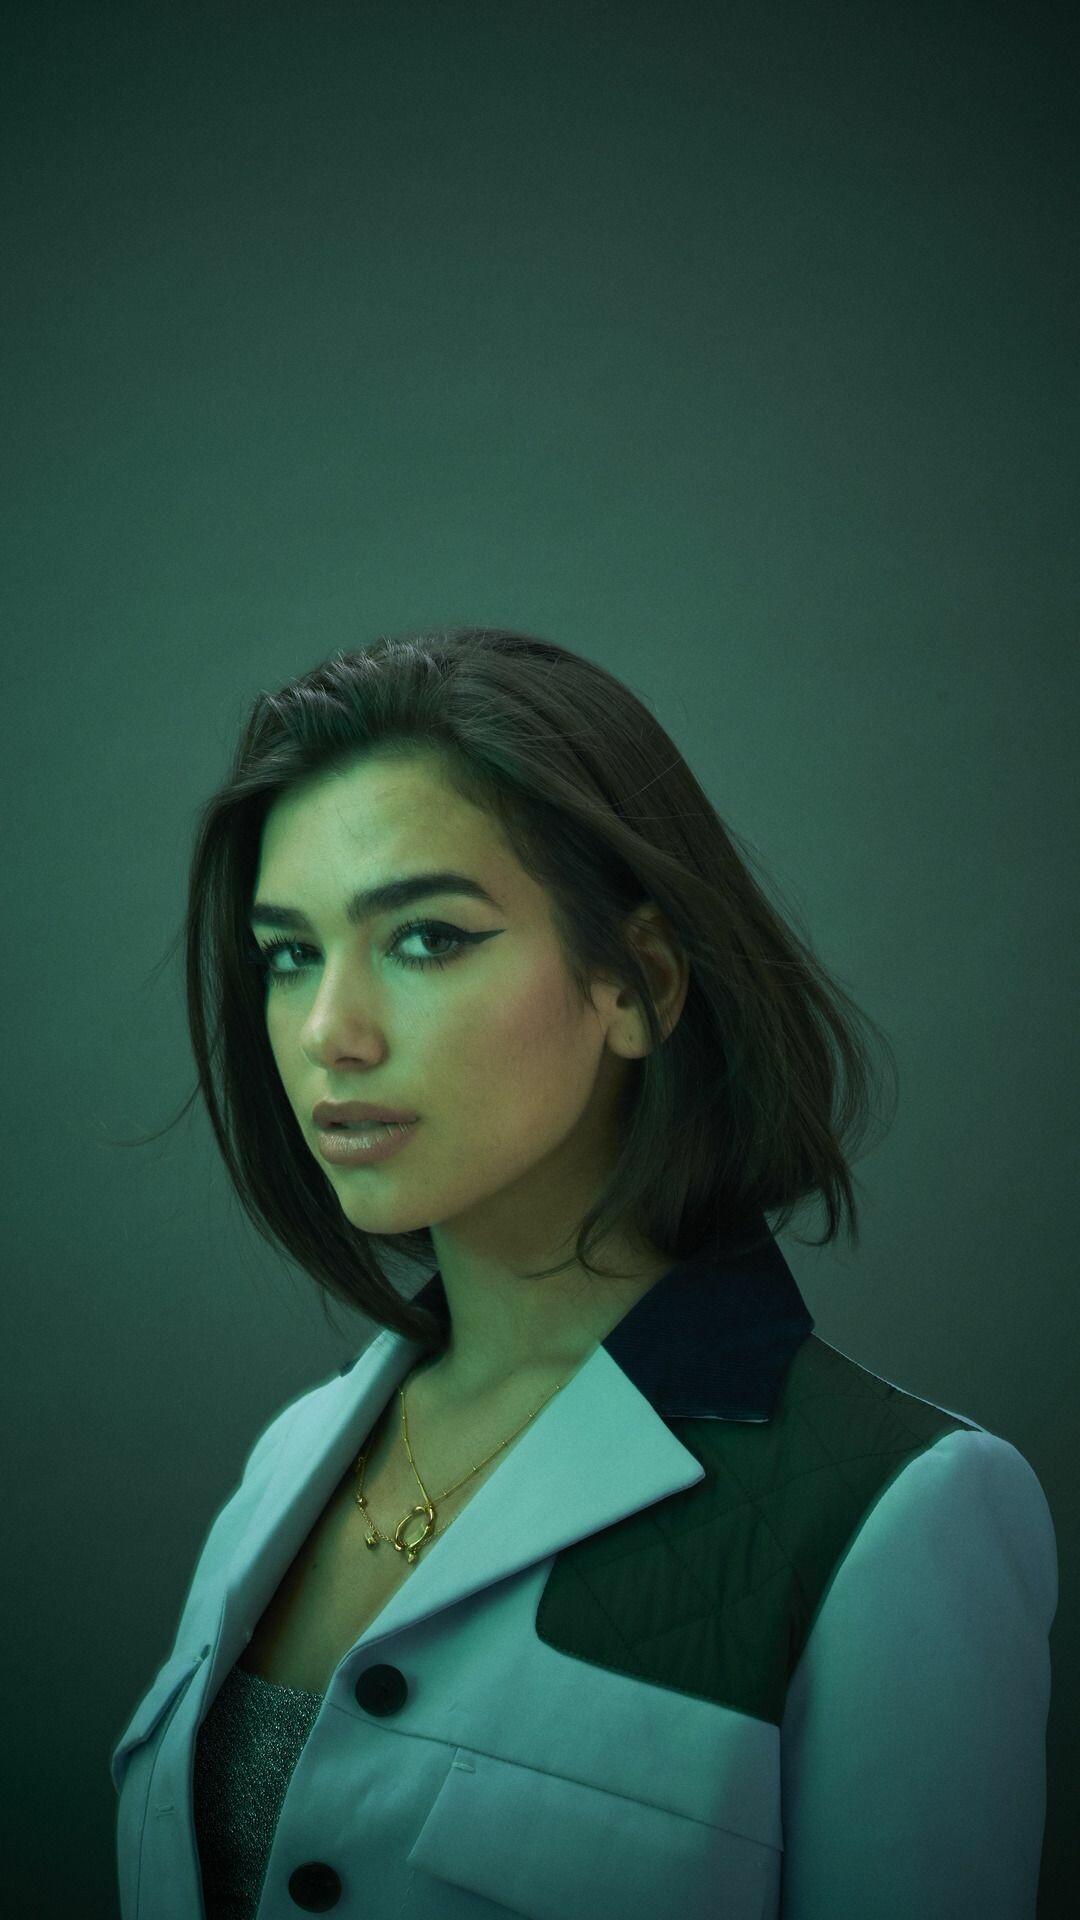 Dua Lipa iPhone wallpapers, Free backgrounds, High-quality images, 1080x1920 Full HD Phone